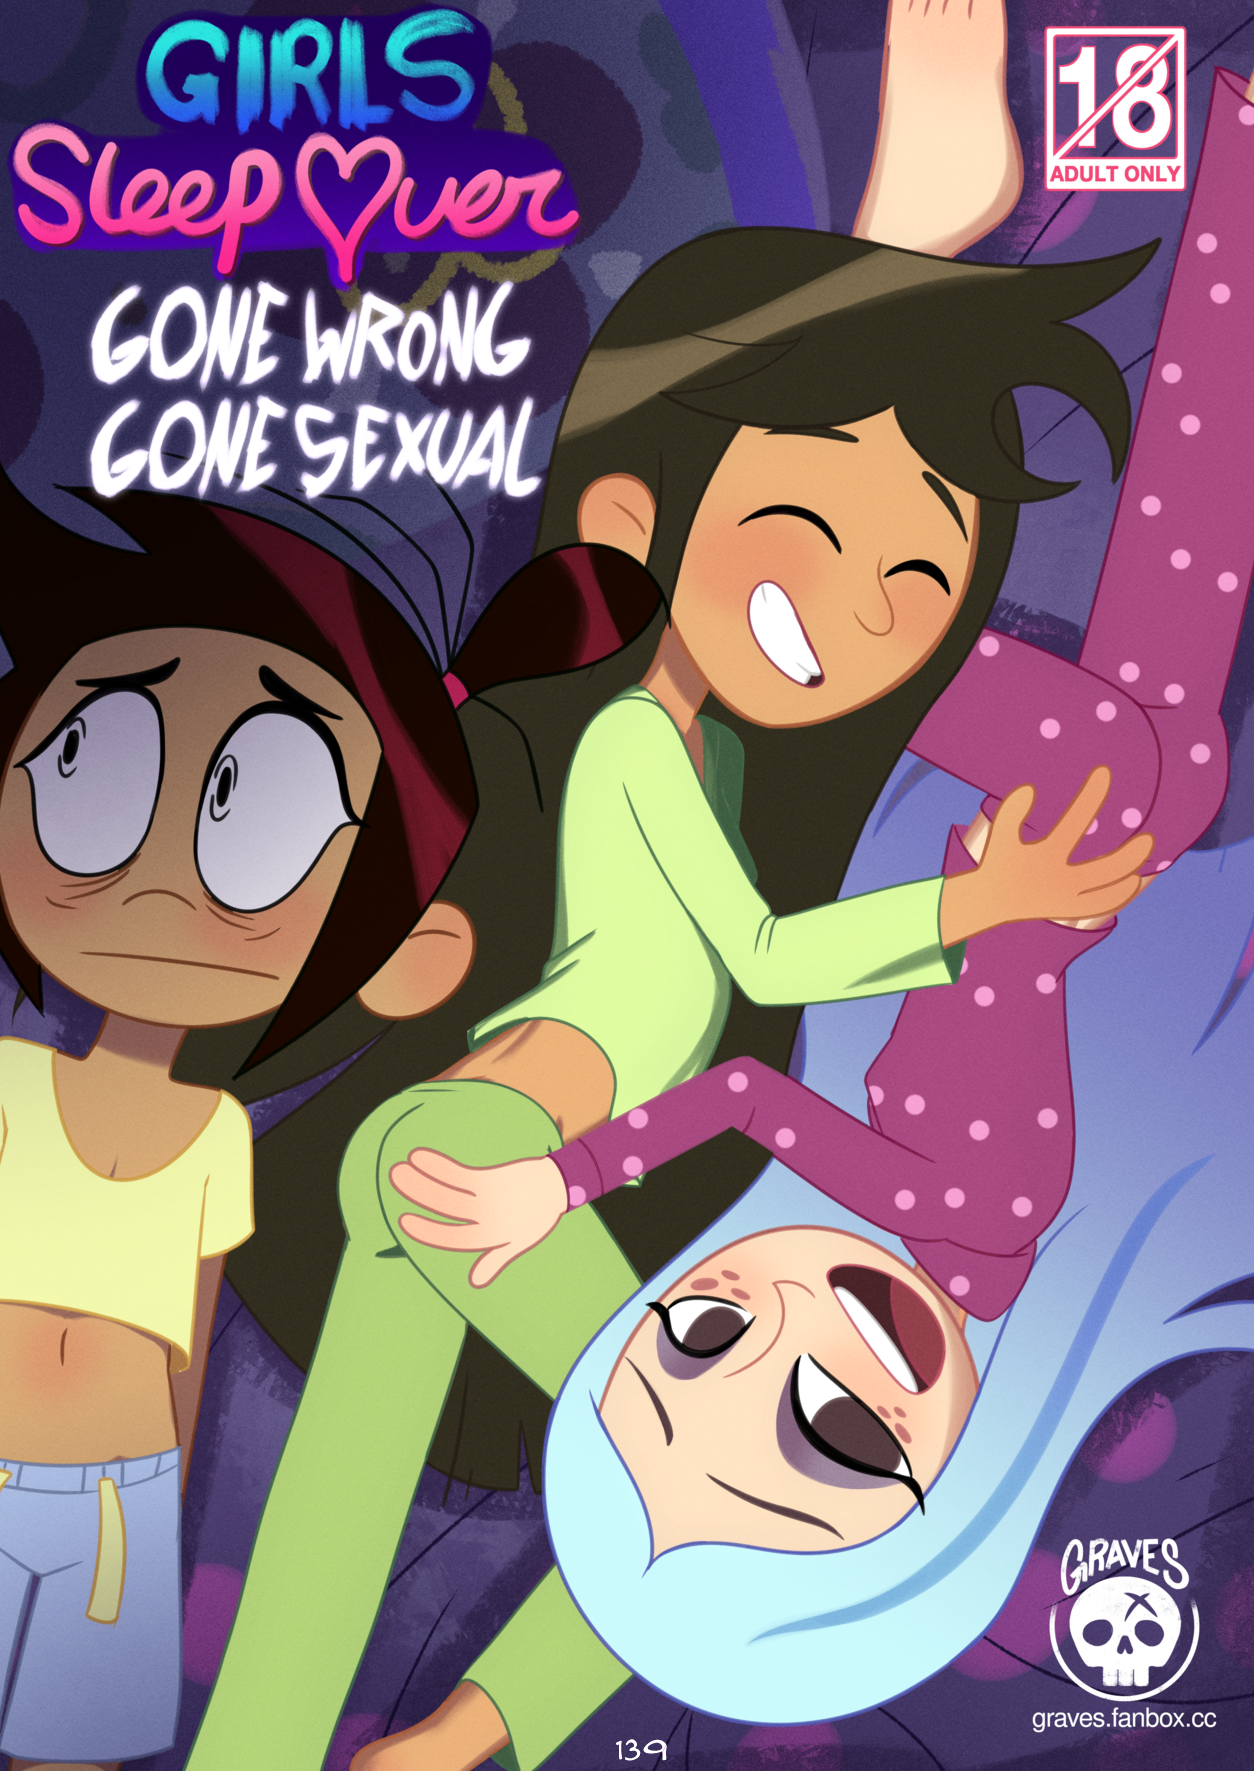 Girls SleepOver - Gone Wrong (Gone Sexual) porn comic picture 1